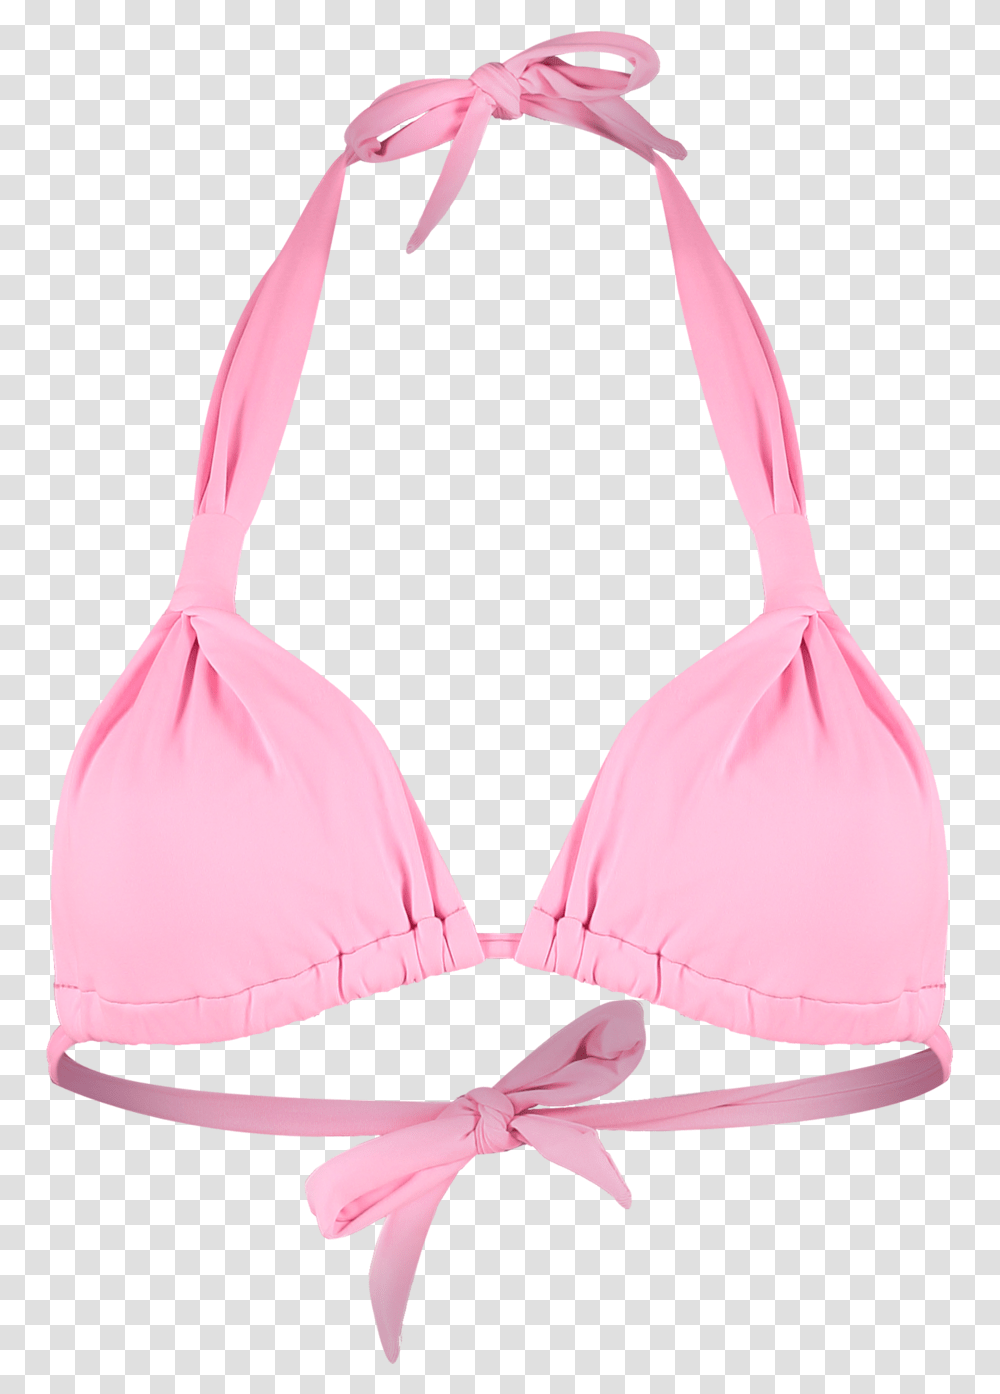 All Luca Nua Swimwear And Bikinis Swimsuit, Clothing, Apparel, Accessories, Accessory Transparent Png